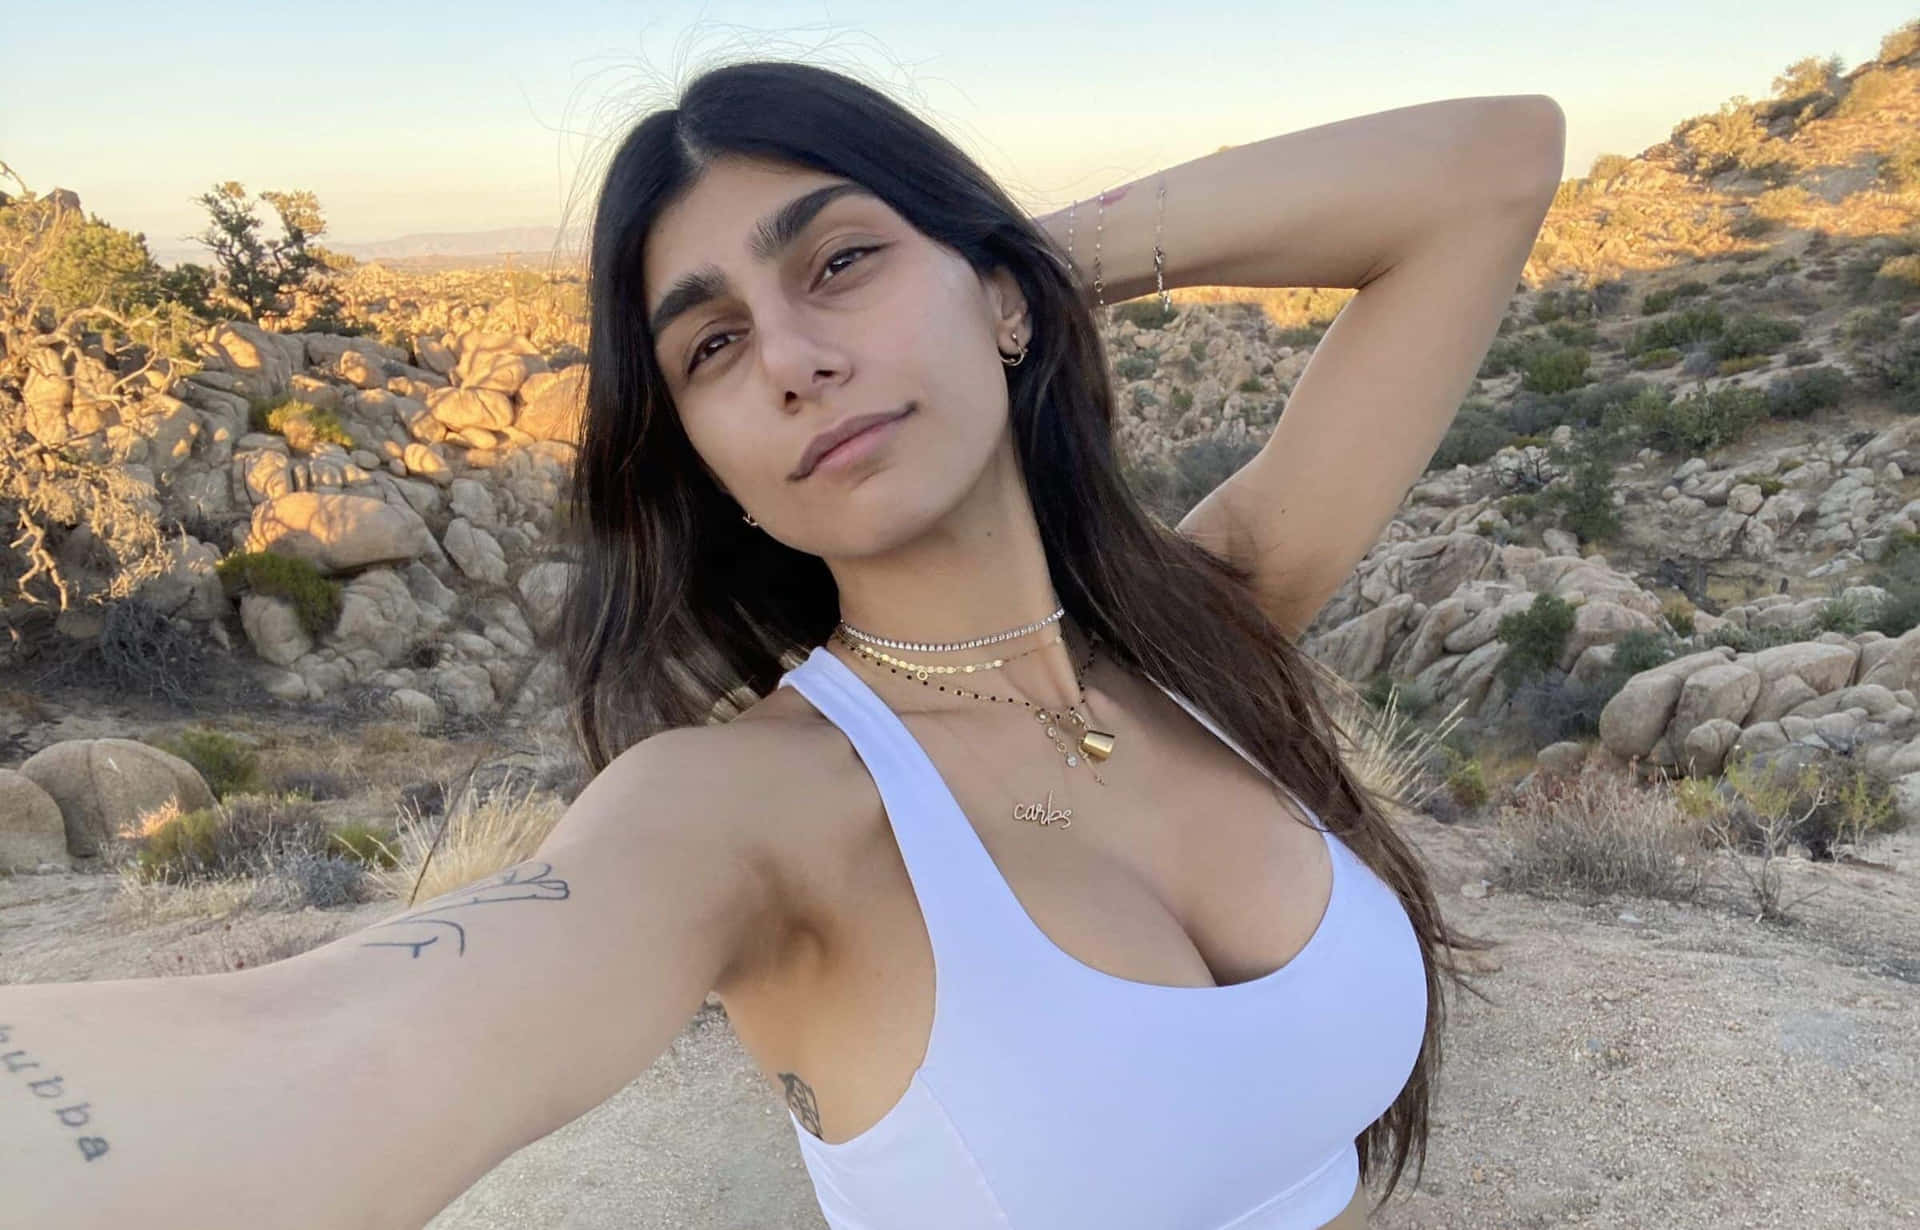 Private video Mia Khalifa Onlyfans Nude 2022